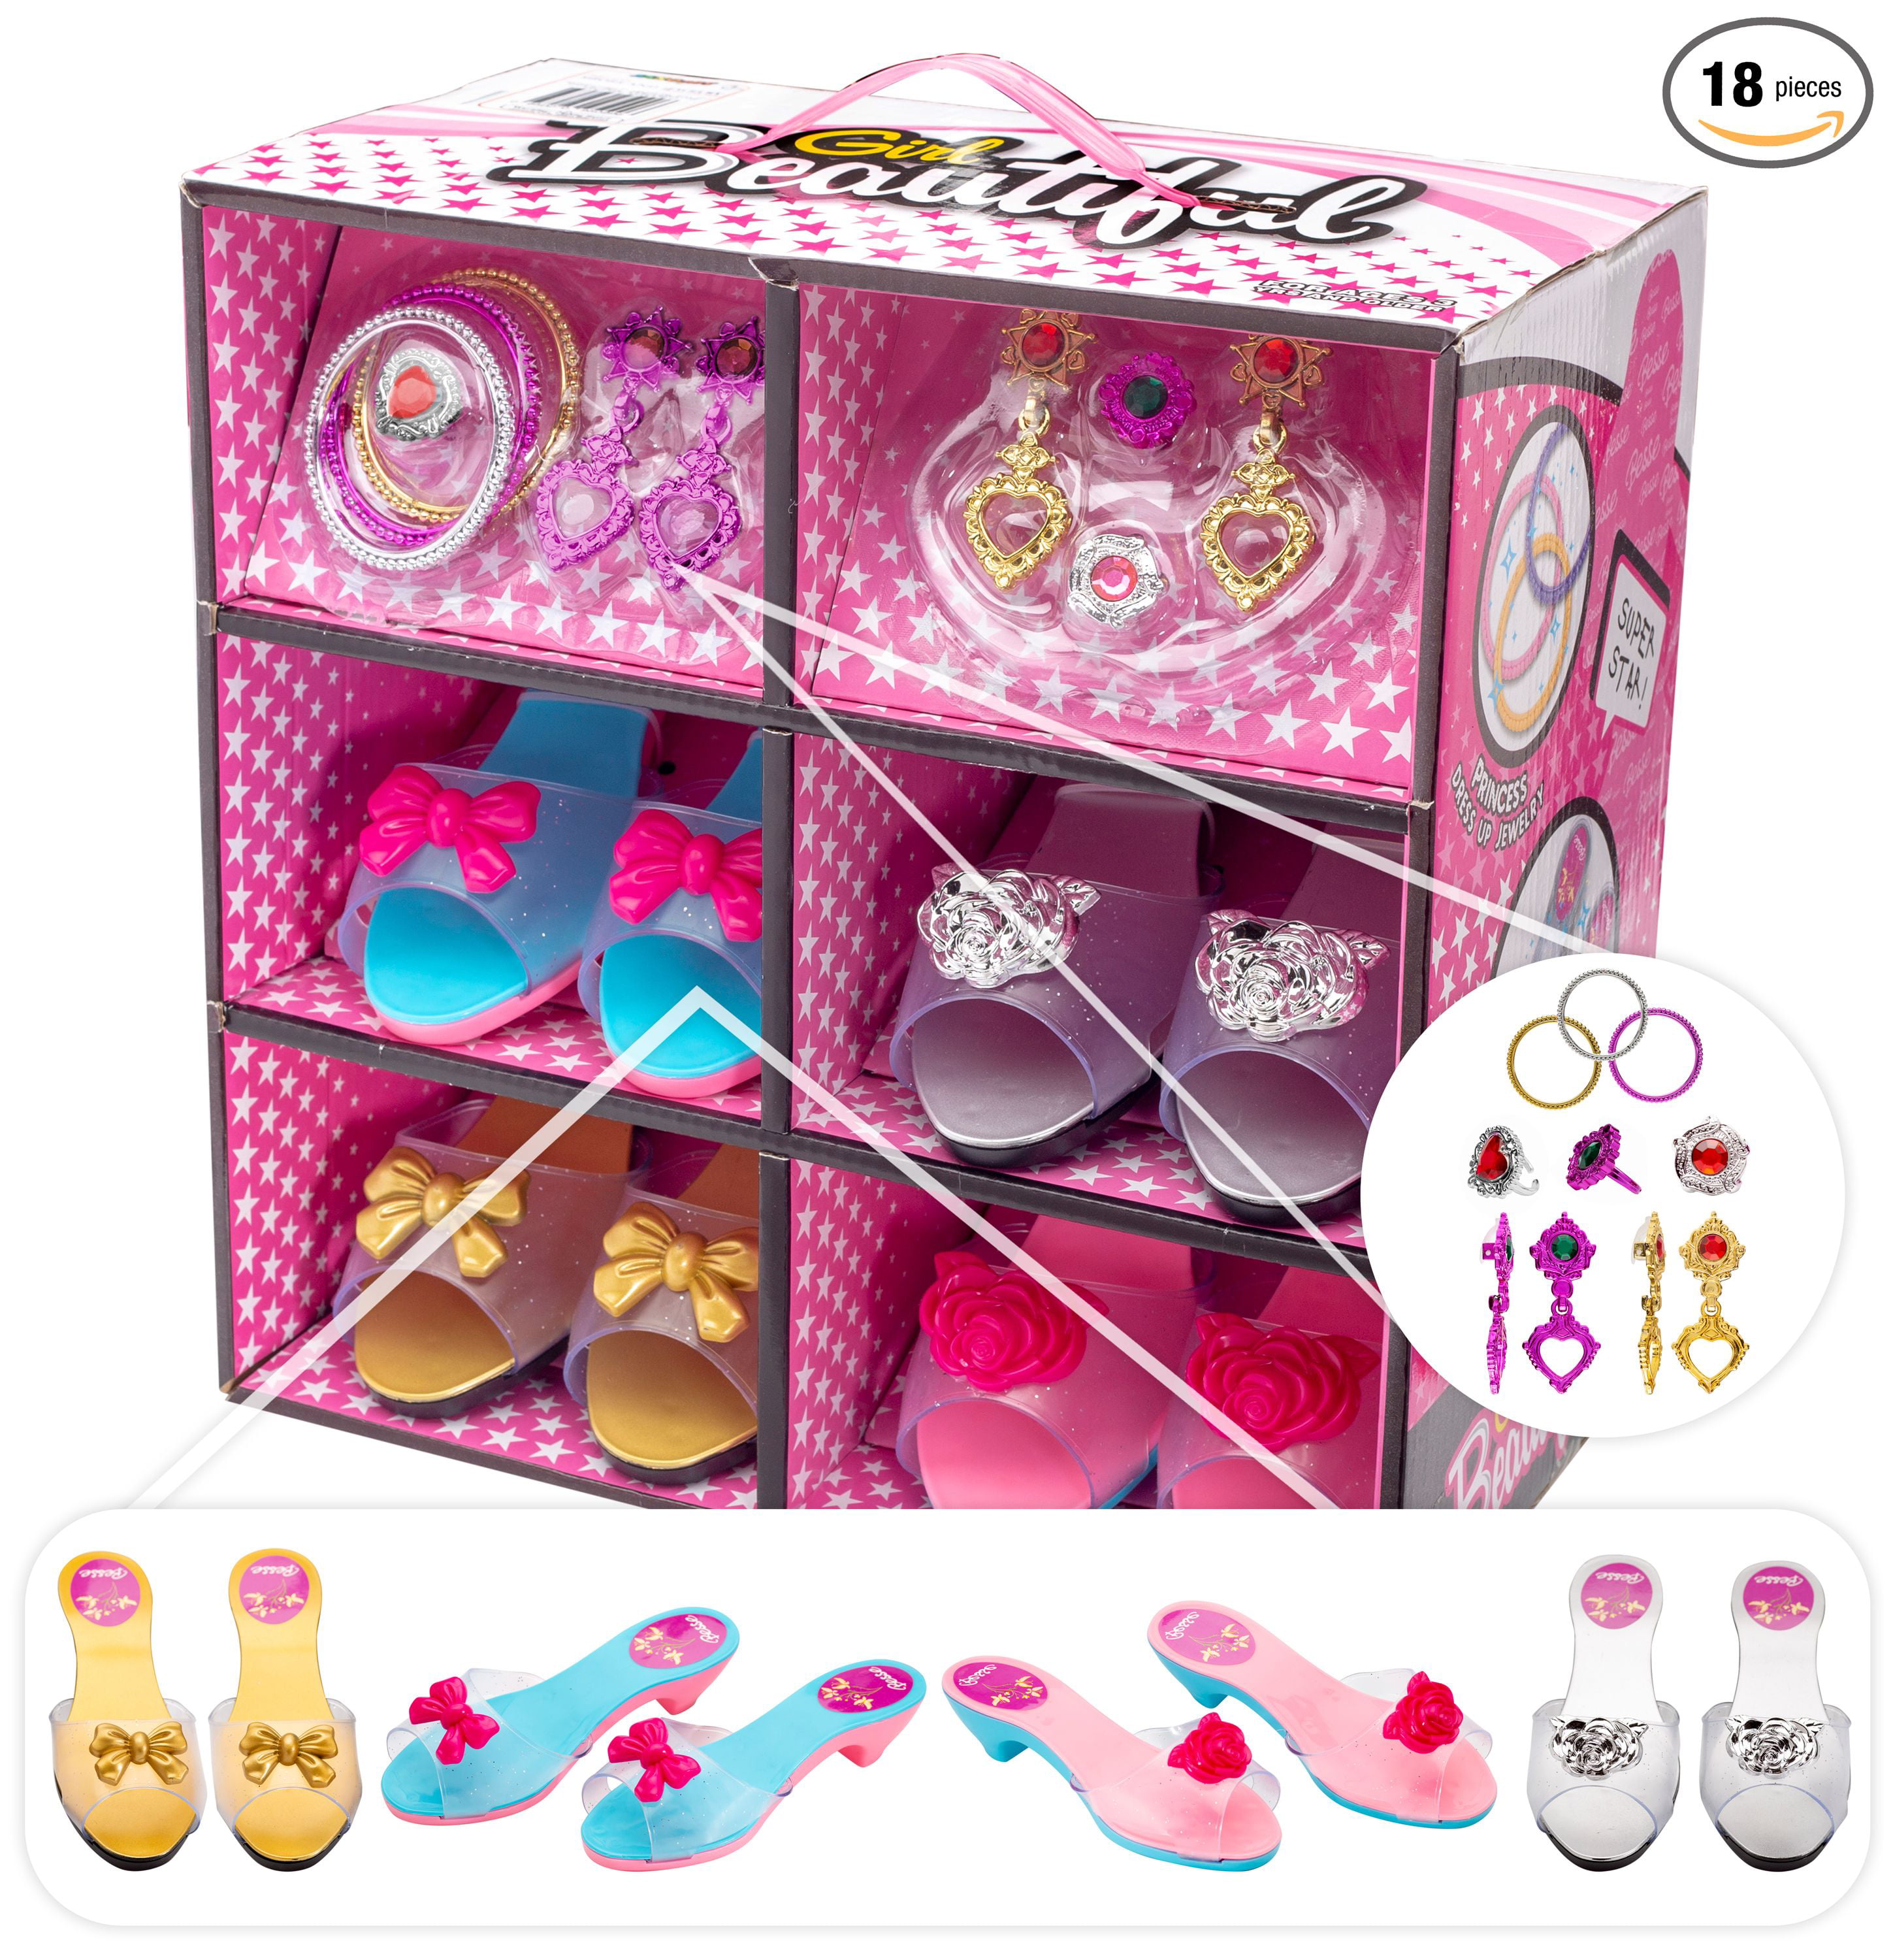 Little Girl Princess Play Gift Set with 